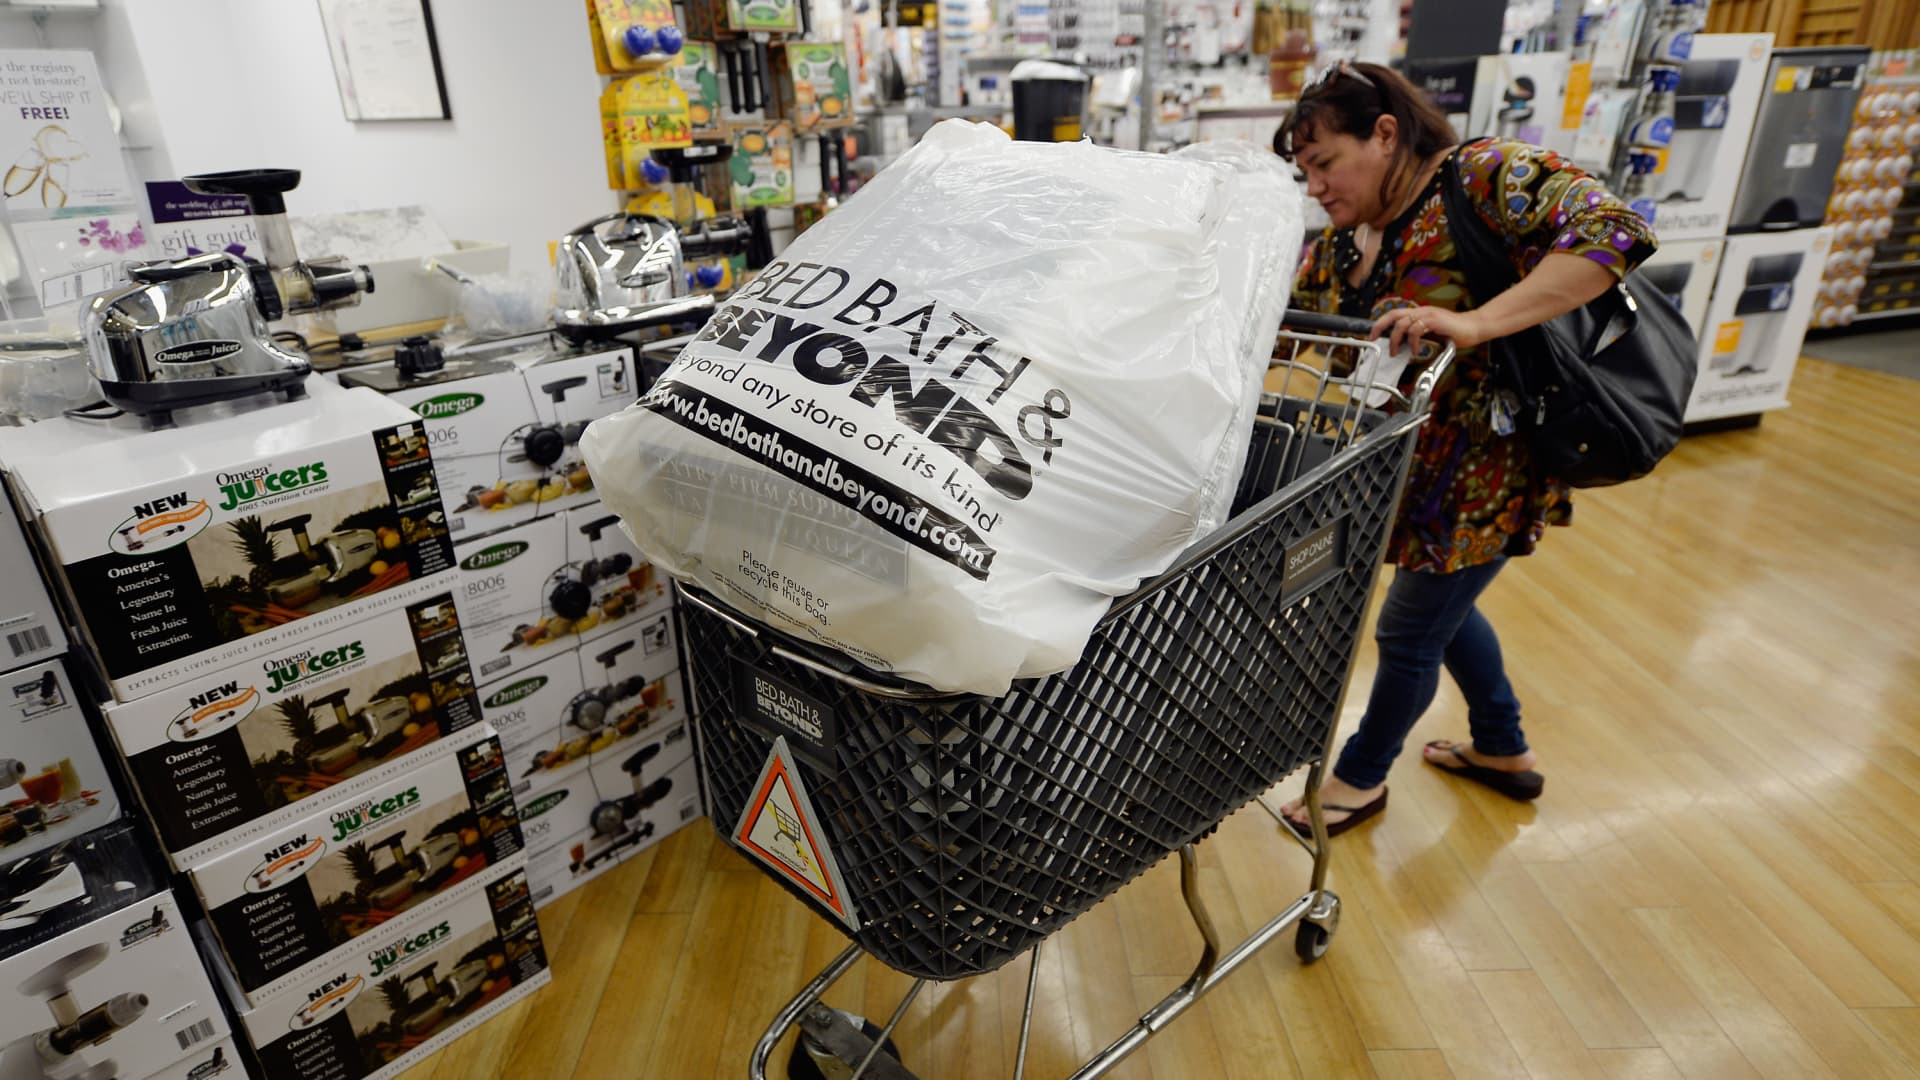 Raymond James downgrades Bed Bath & Beyond, says turnaround plan ‘only kicks the can down the road’